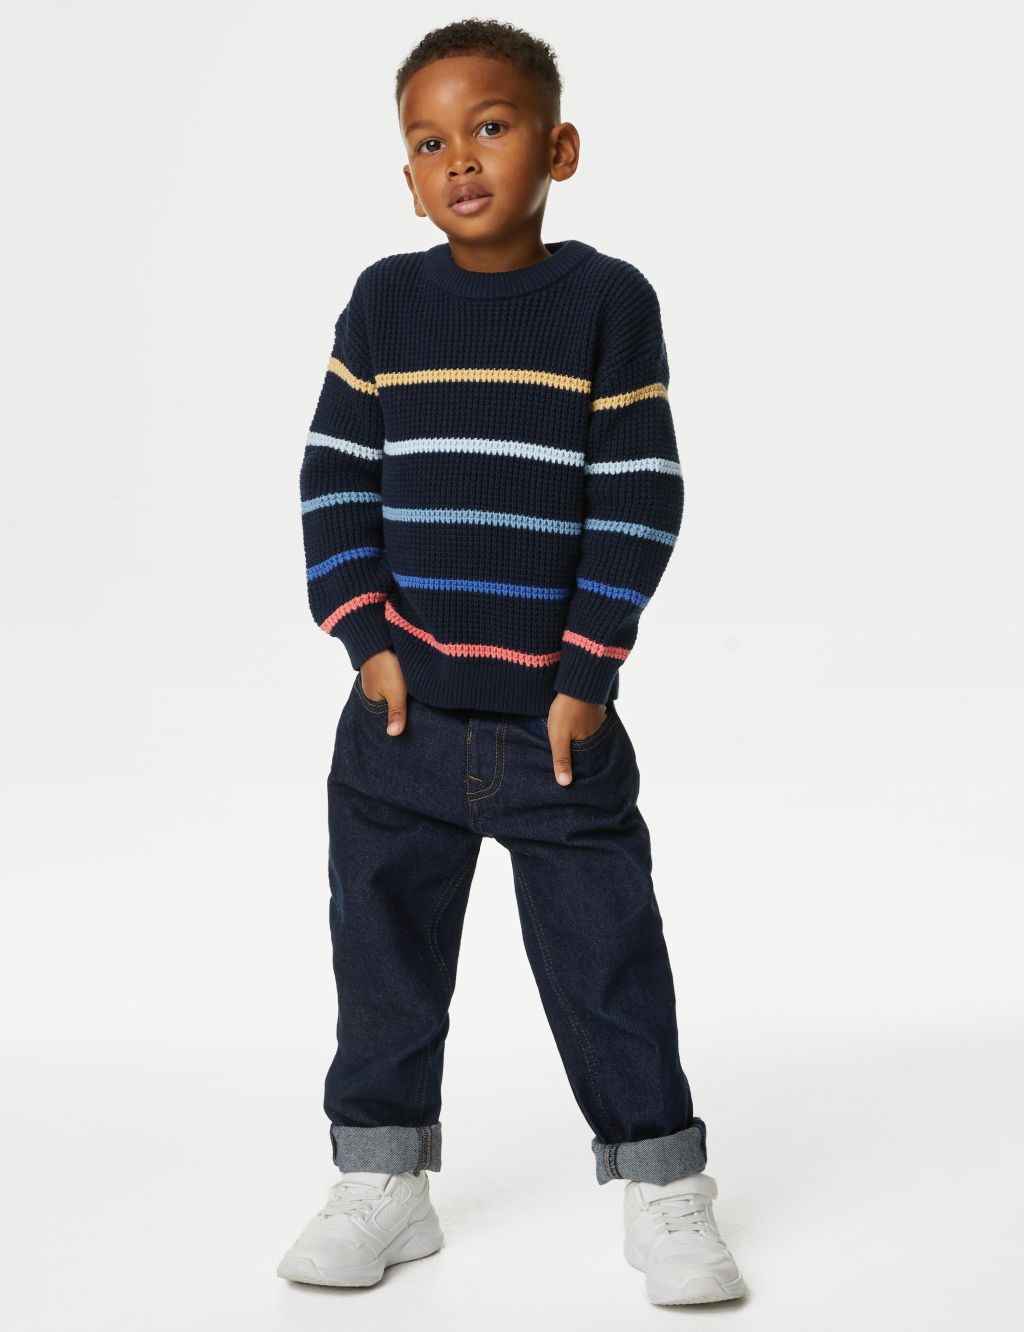 Page 2 - Boys' Clothes | M&S